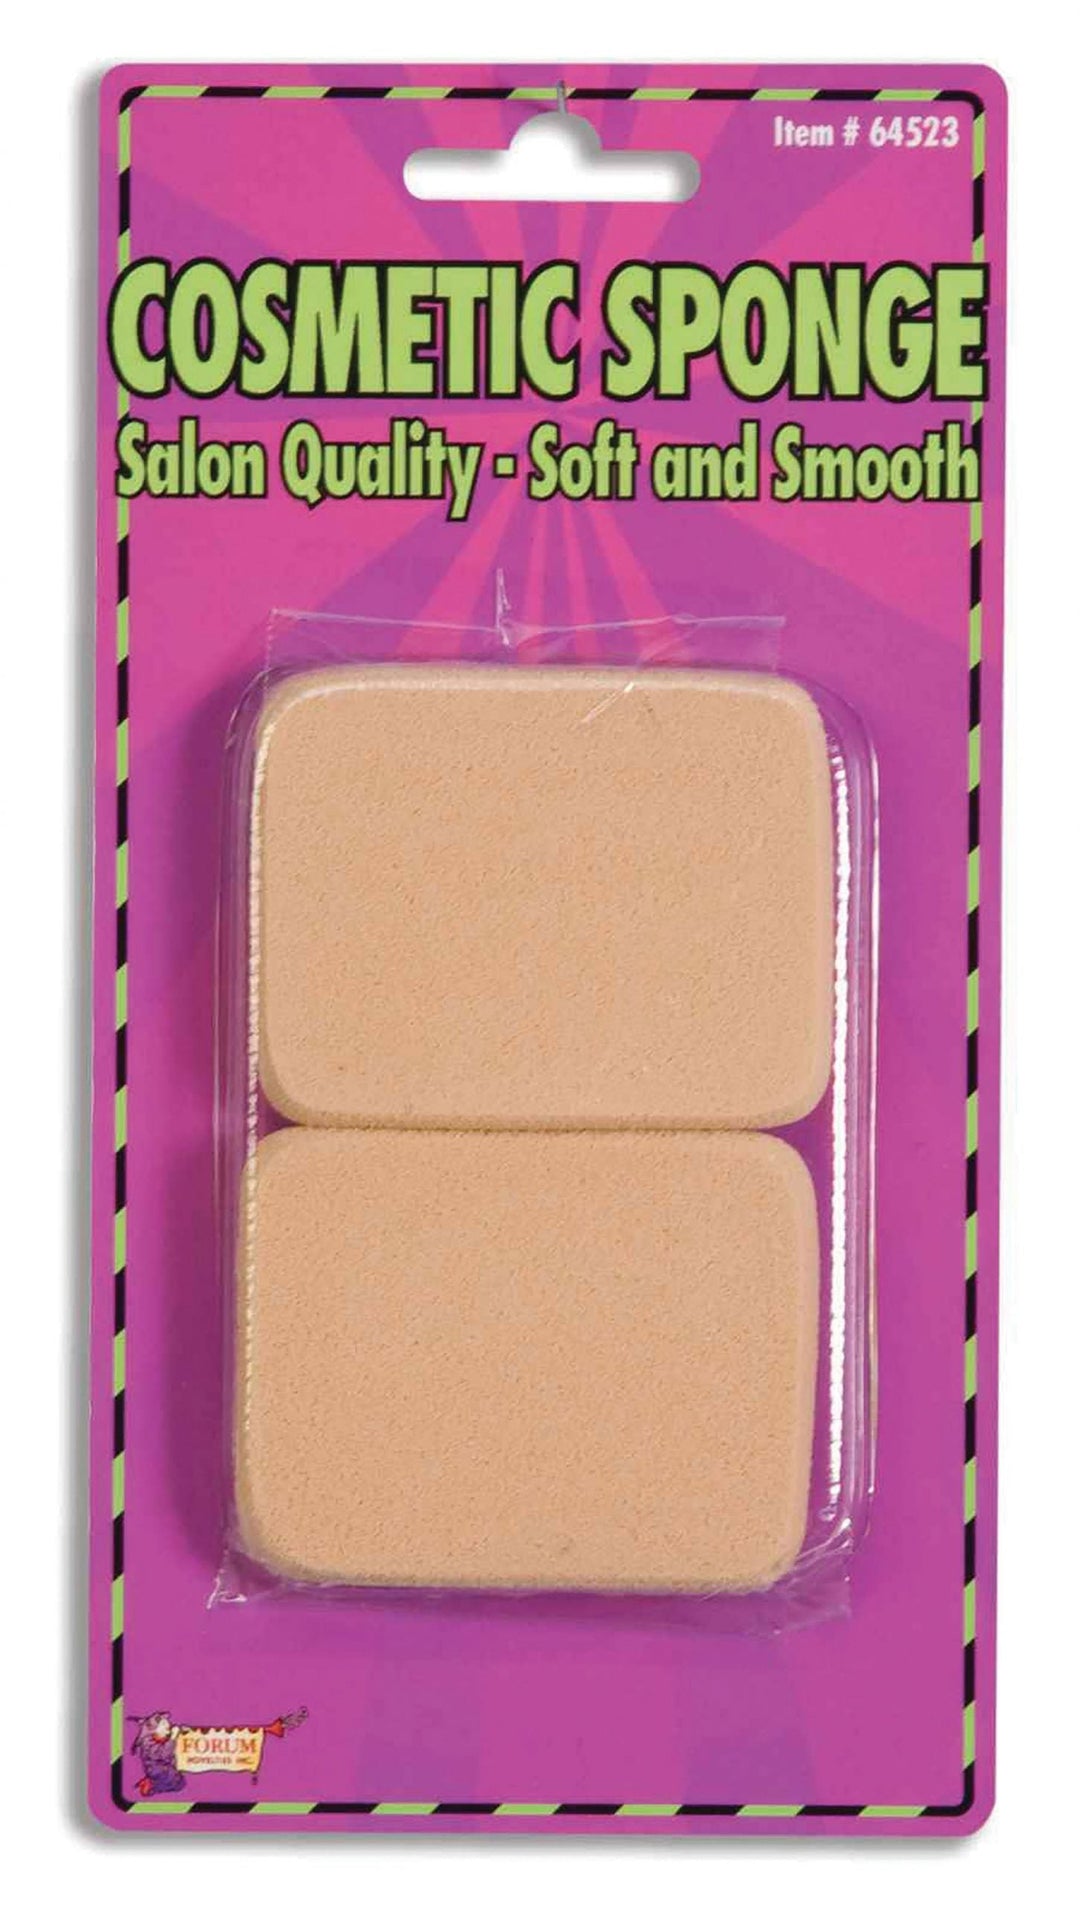 Cosmetic Sponges 2 Pack Make Up Applicator Pads_1